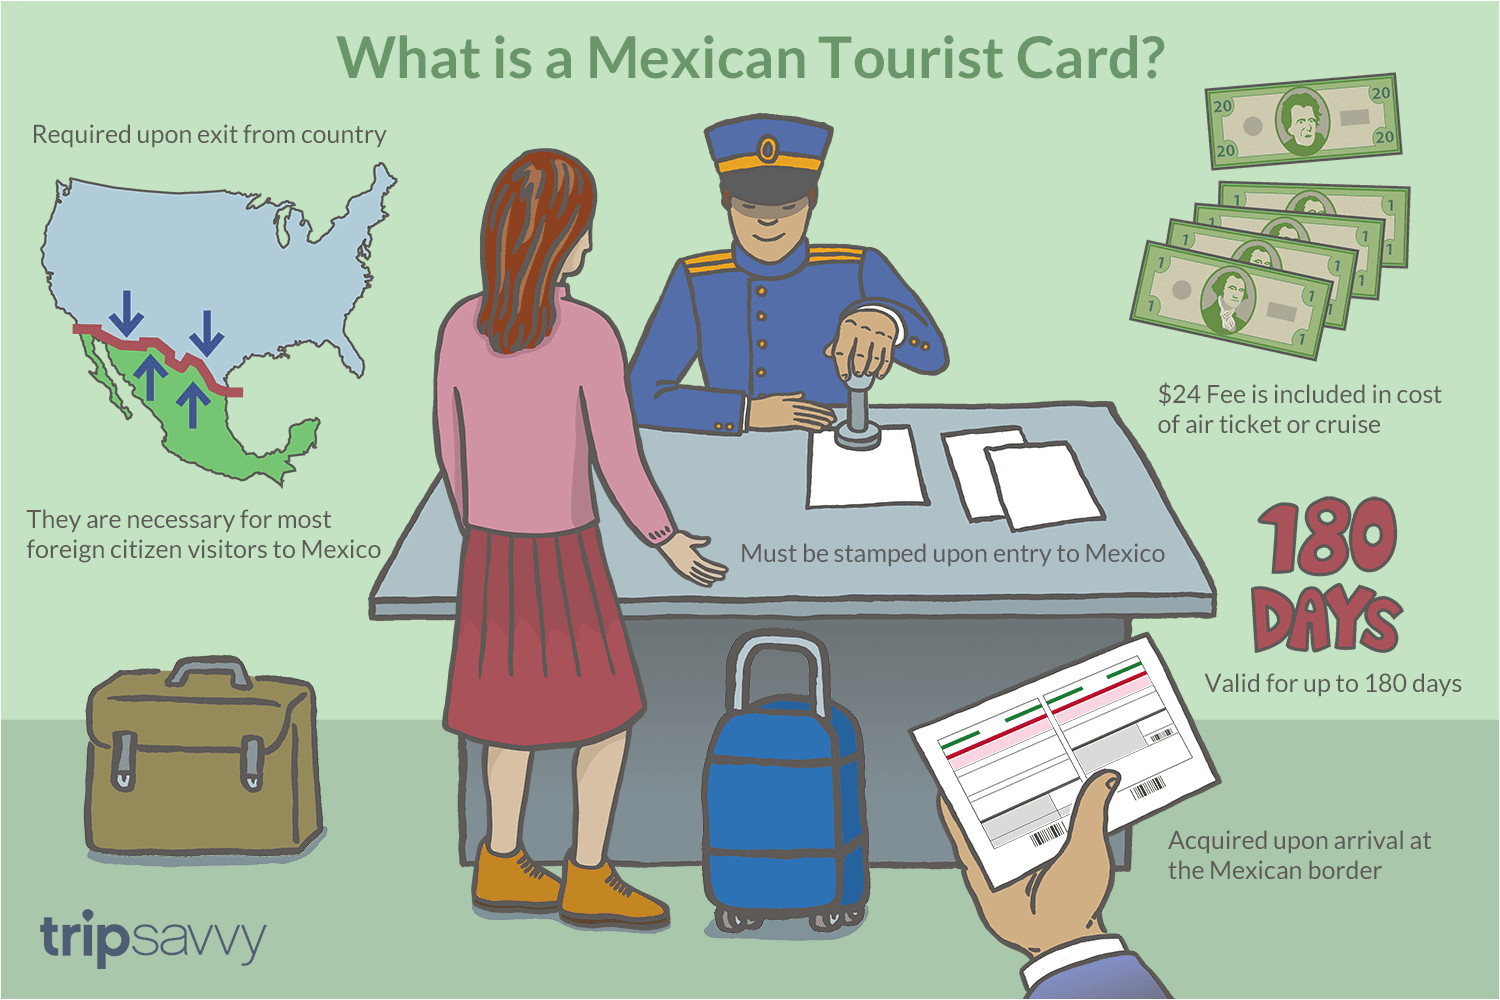 Can I Cross the Border with An Expired Green Card What is A Mexican tourist Card and How Do I Get One